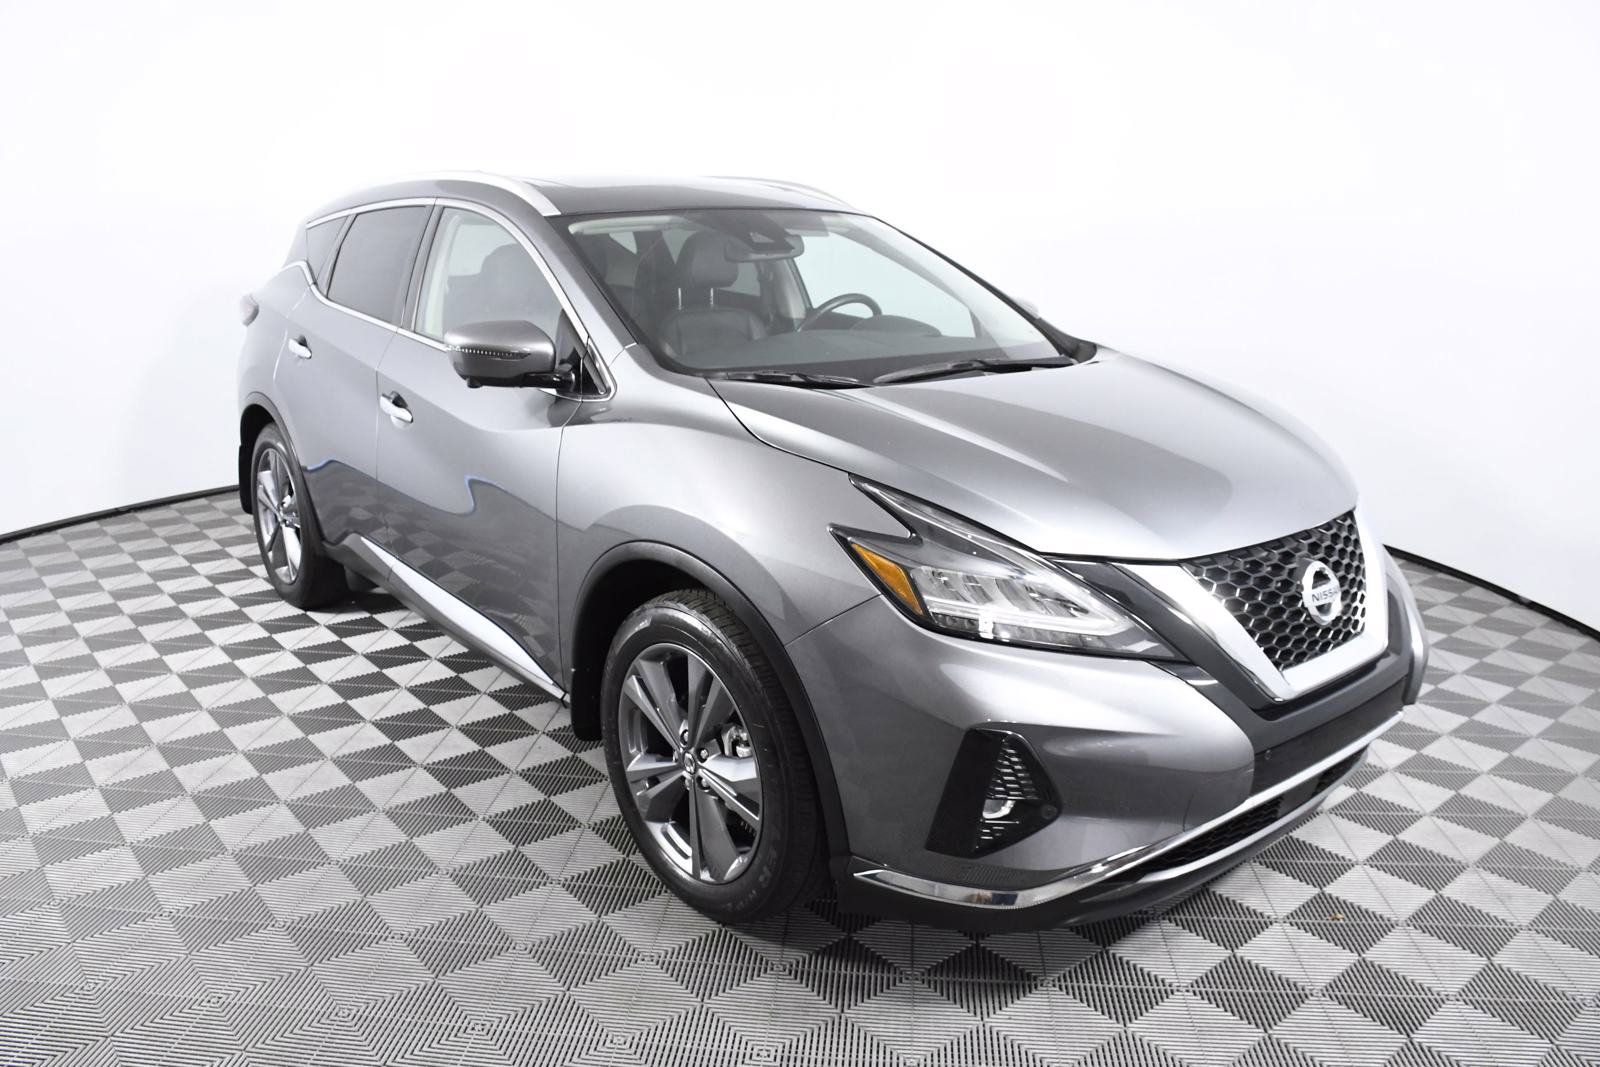 Pre-Owned 2020 Nissan Murano Platinum Sport Utility in Palmetto Bay  #N139048 | HGreg Nissan Kendall